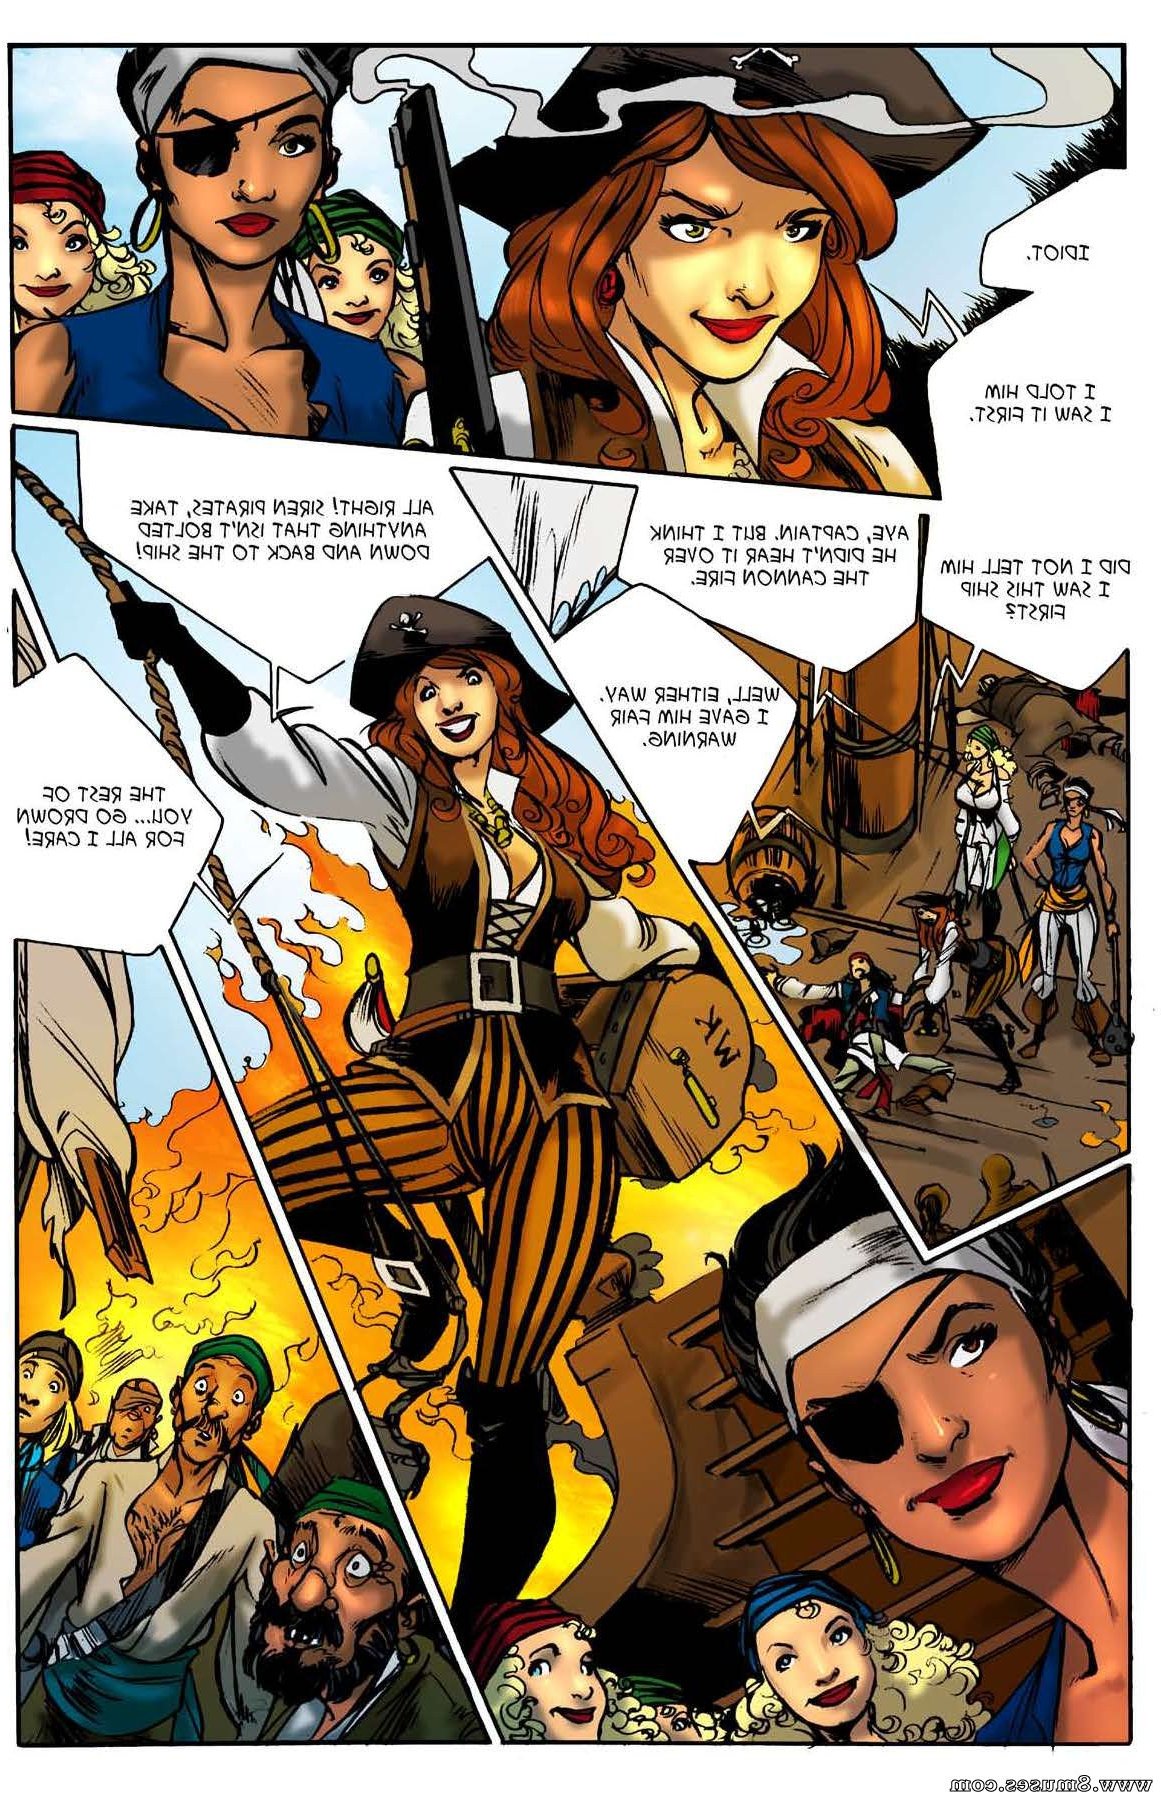 BE-Story-Club-Comics/A-Pirates-Life/Issue-1 A_Pirates_Life_-_Issue_1_4.jpg